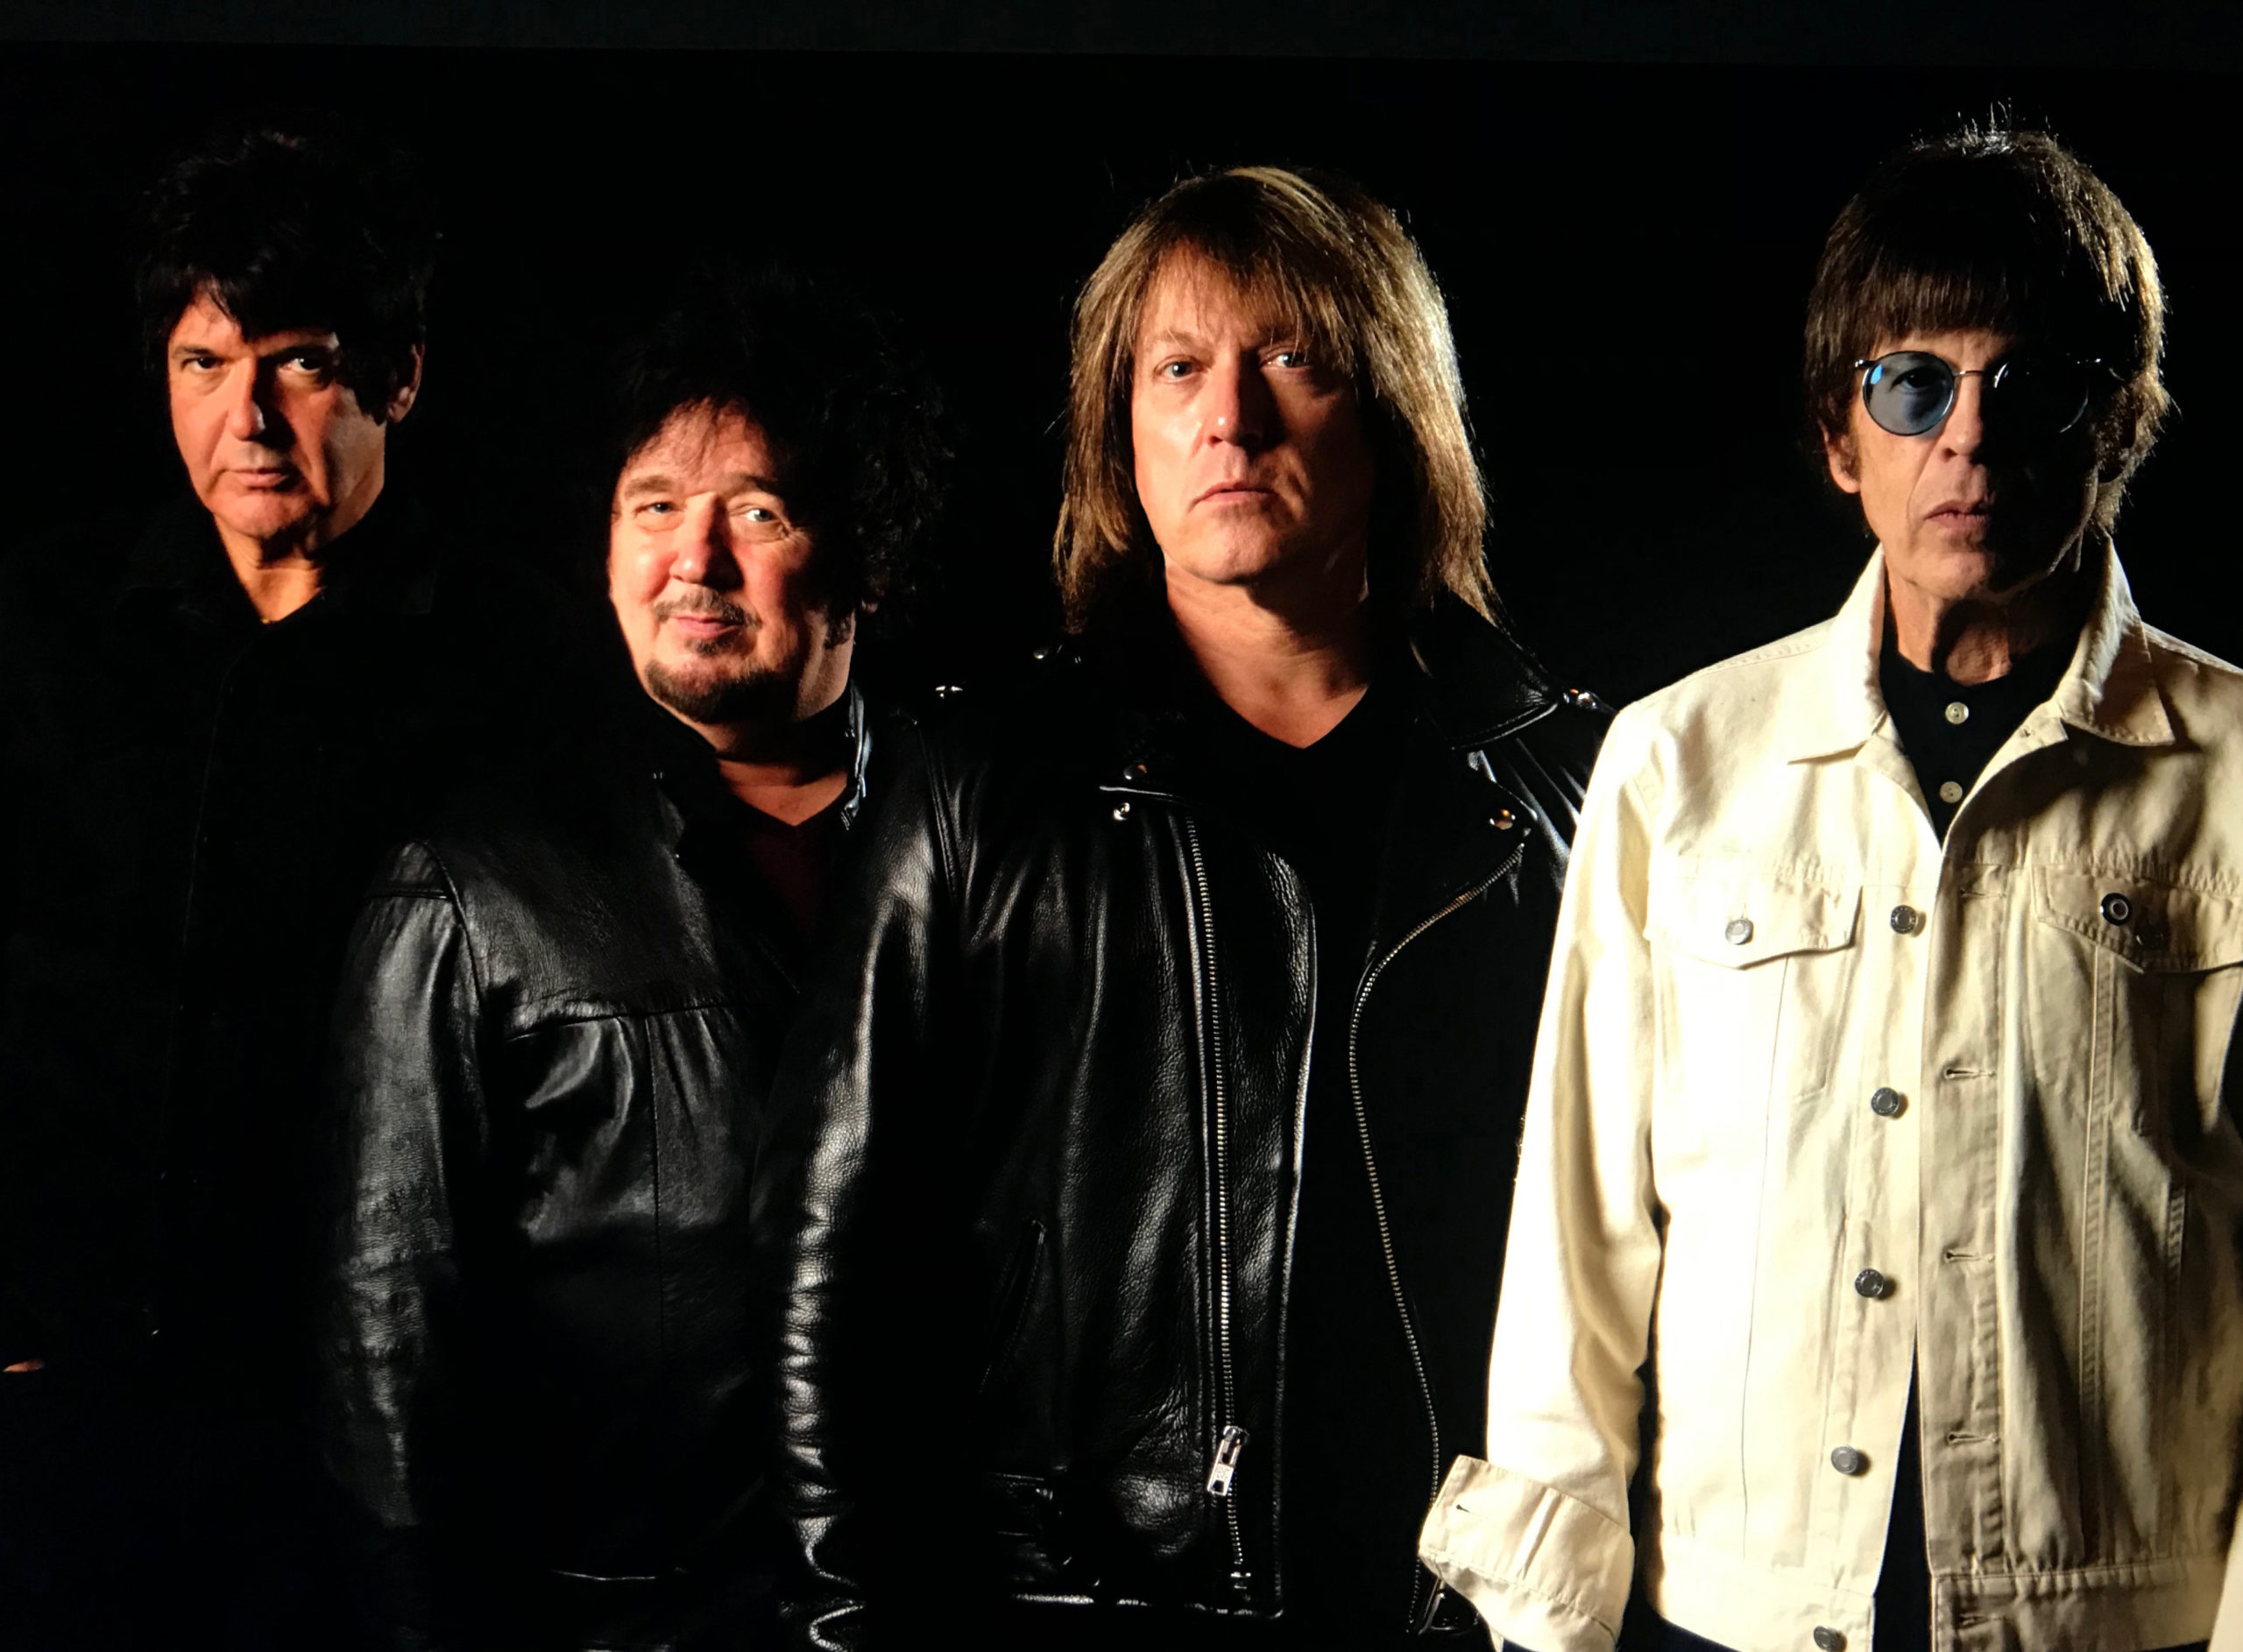 Video Premiere: The Empty Hearts (Featuring Elliot Easton and Clem Burke) Nod to Horror Classics in “Jonathan Harker’s Journal”